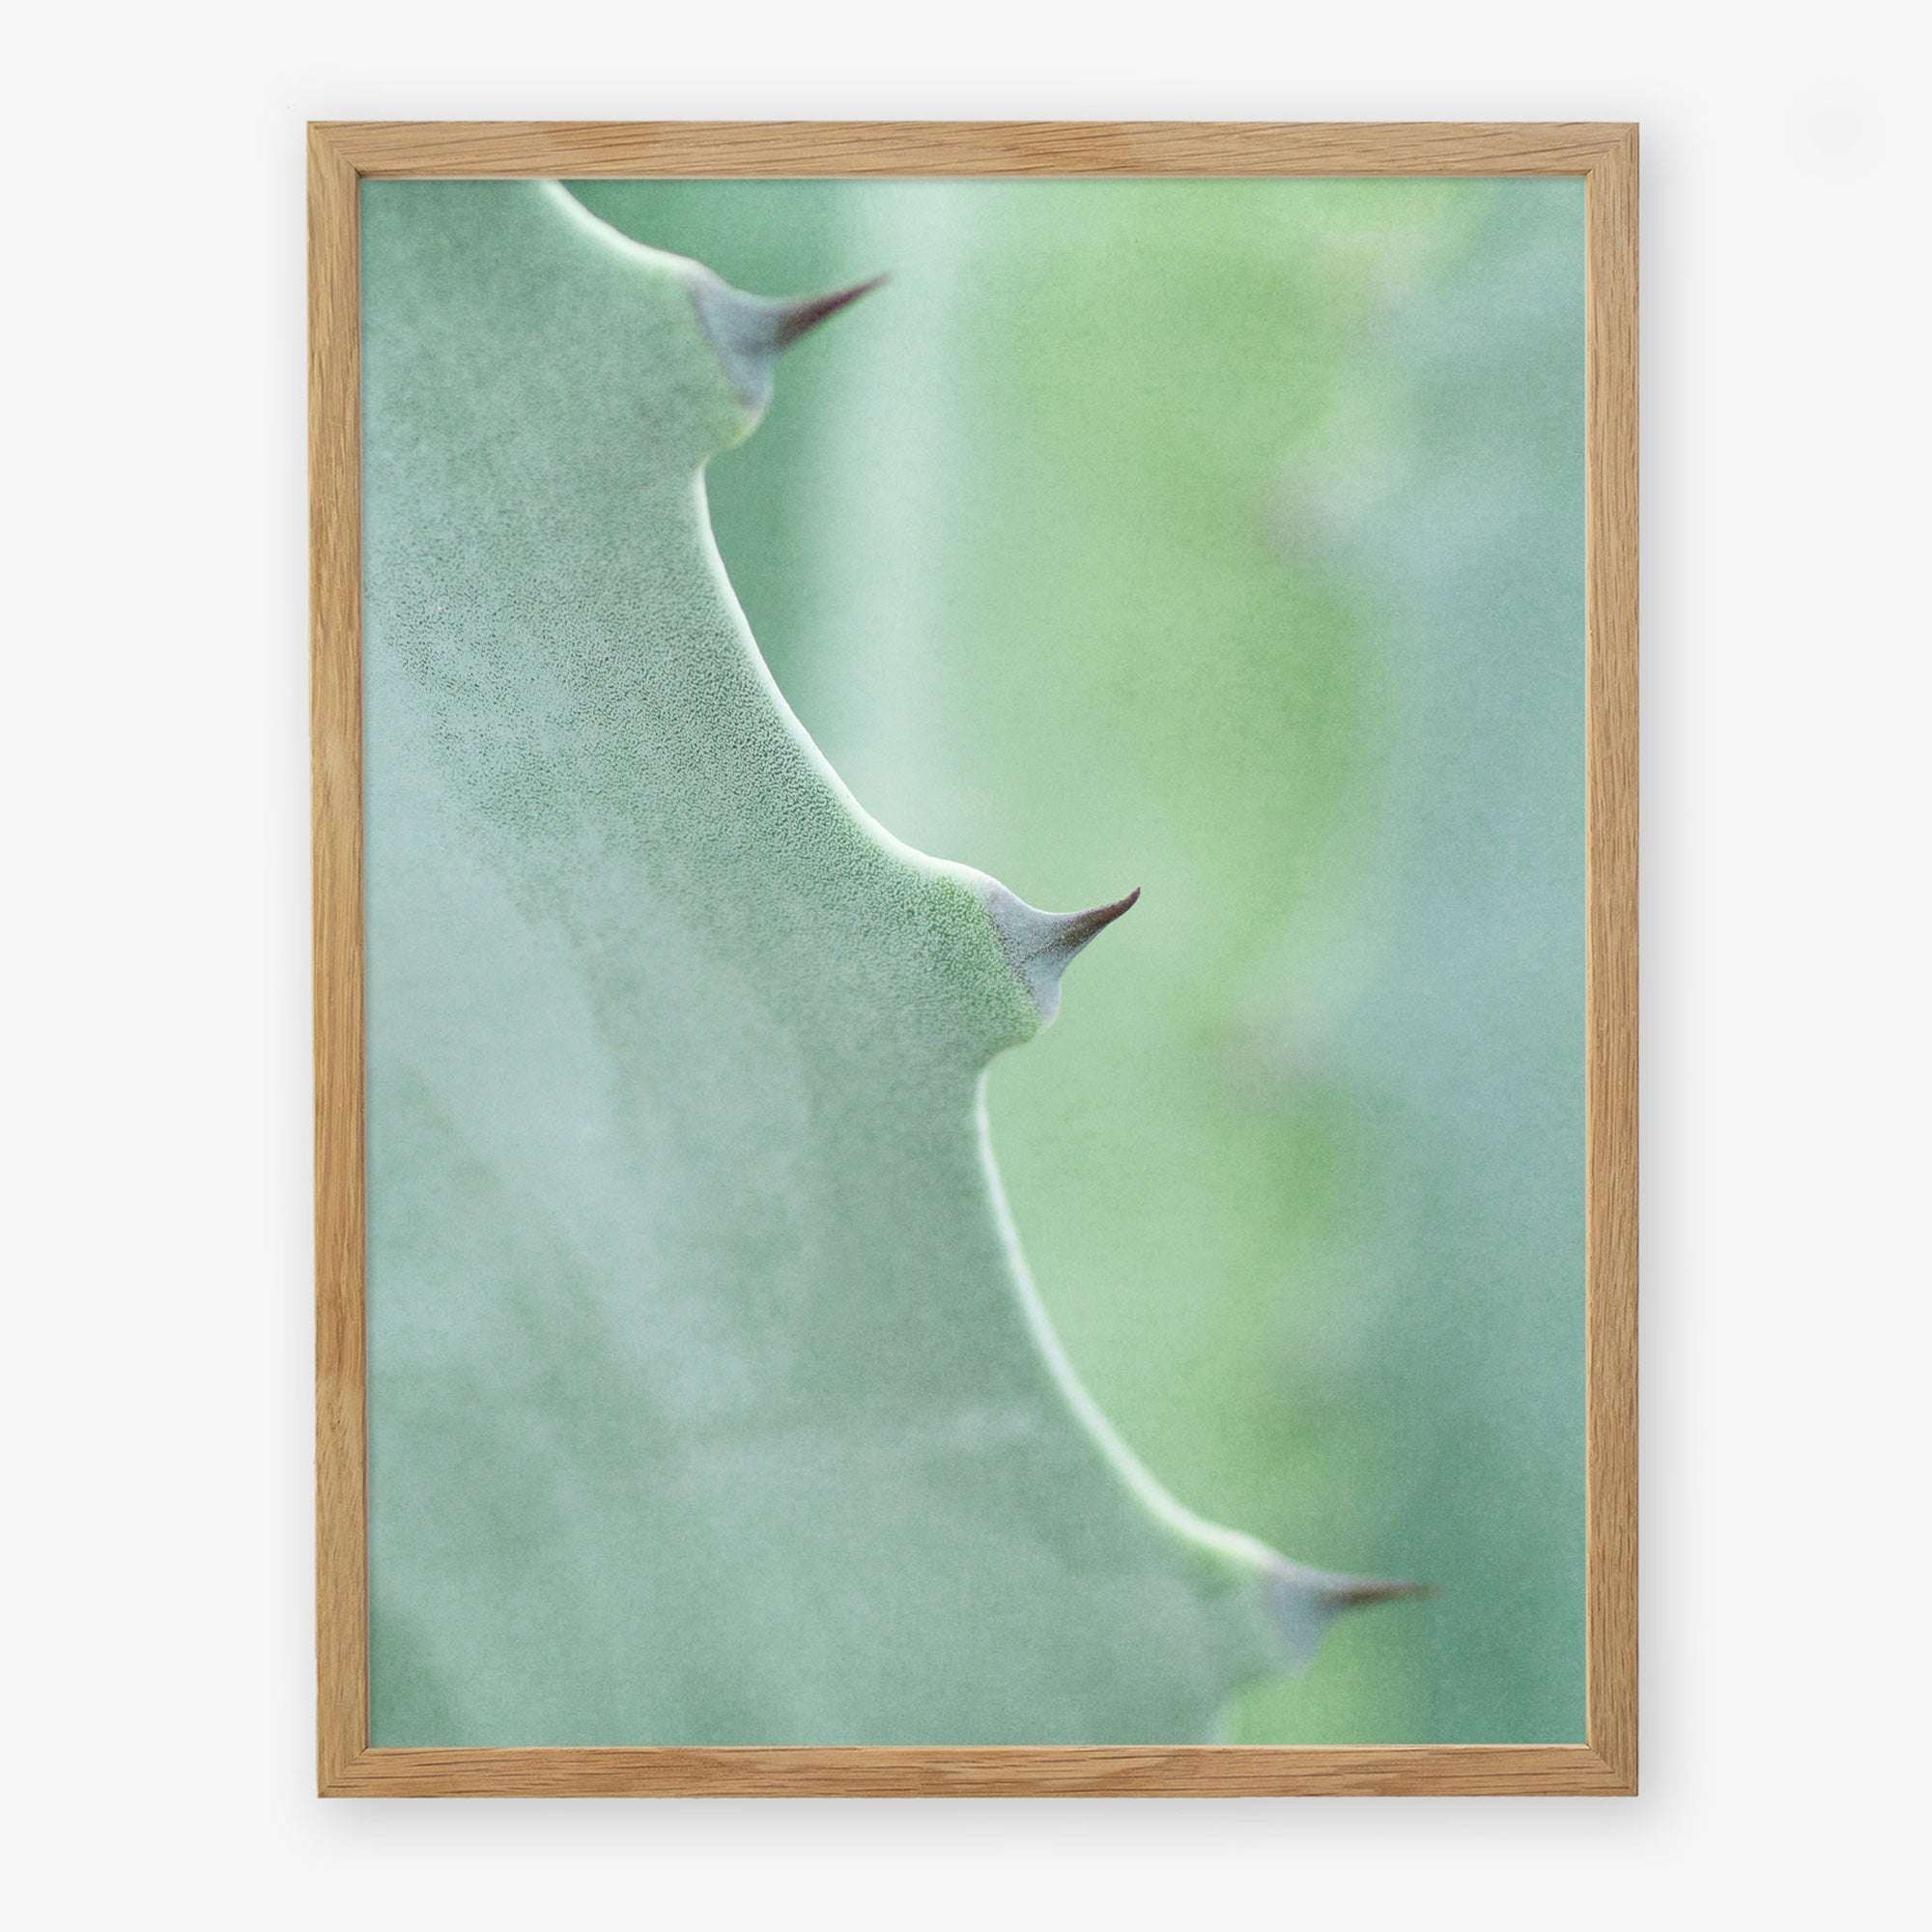 Close-up photograph of a &#39;Green Botanical Print, &#39;Aloe Vera Spikes II&#39; leaf with thorns, printed on archival photographic paper, highlighting the texture and natural gradients of the plant. Brand: Offley Green